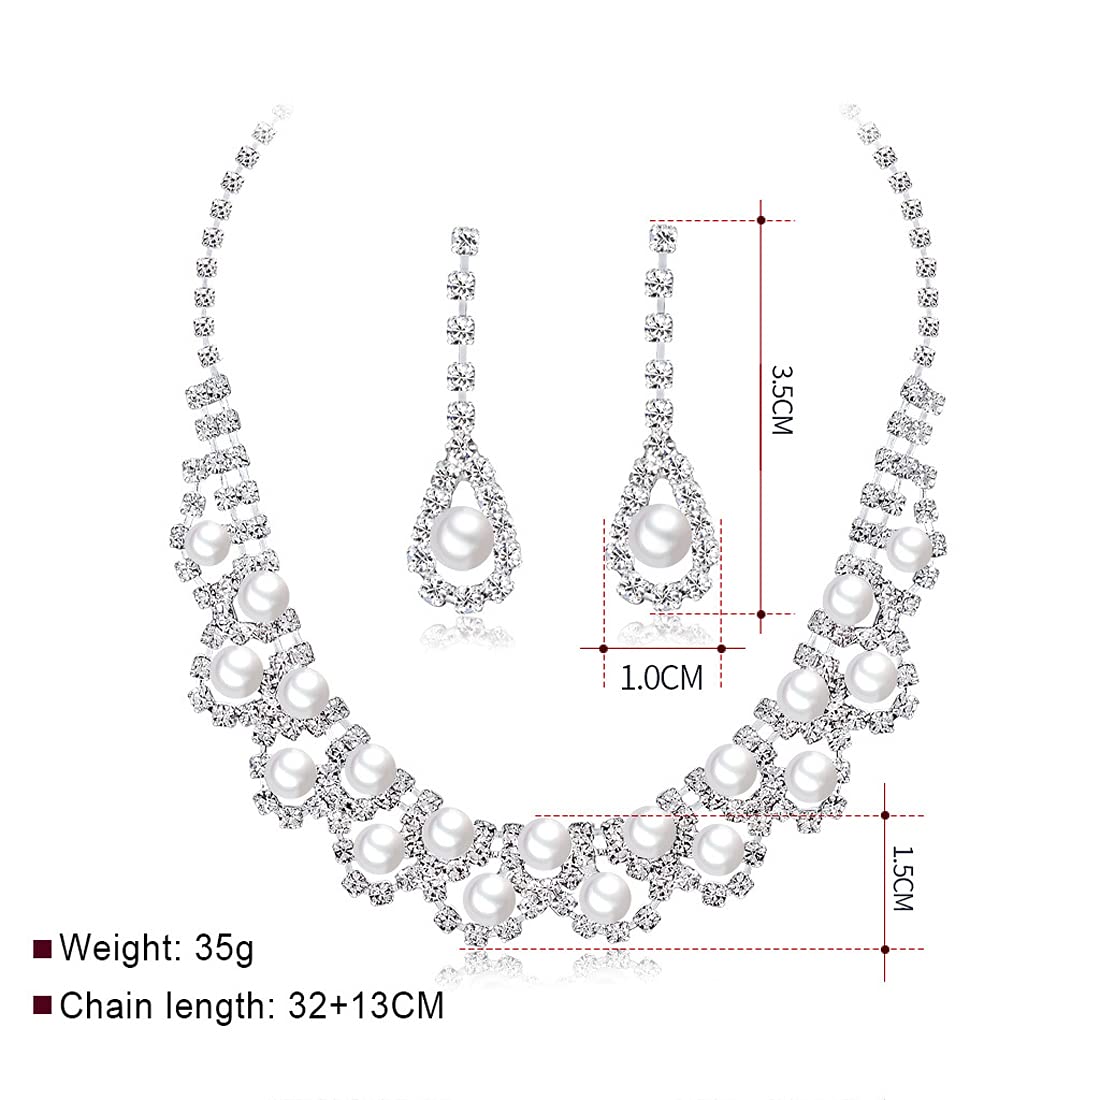 Yellow Chimes Elegant Latest Fashion A5 Grade Zircon Crystal Pearl Silver Choker Necklace Set for Women and Girls, White, Medium (Model: YCFJNS-361PRLCL-SL)